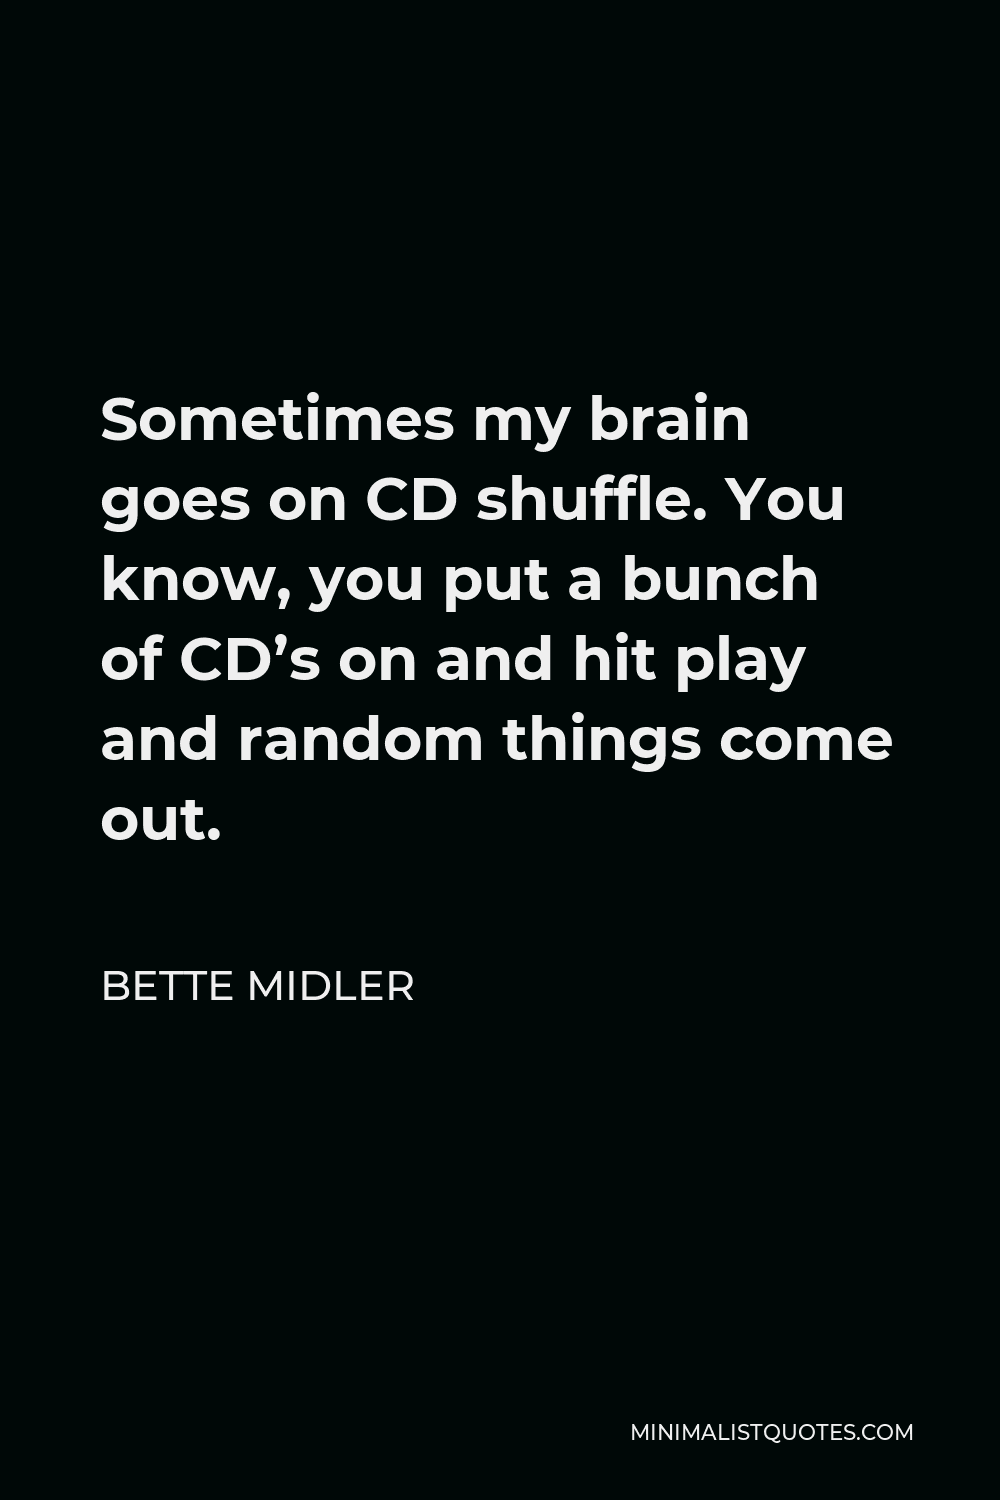 Bette Midler Quote - Sometimes my brain goes on CD shuffle. You know, you put a bunch of CD’s on and hit play and random things come out.